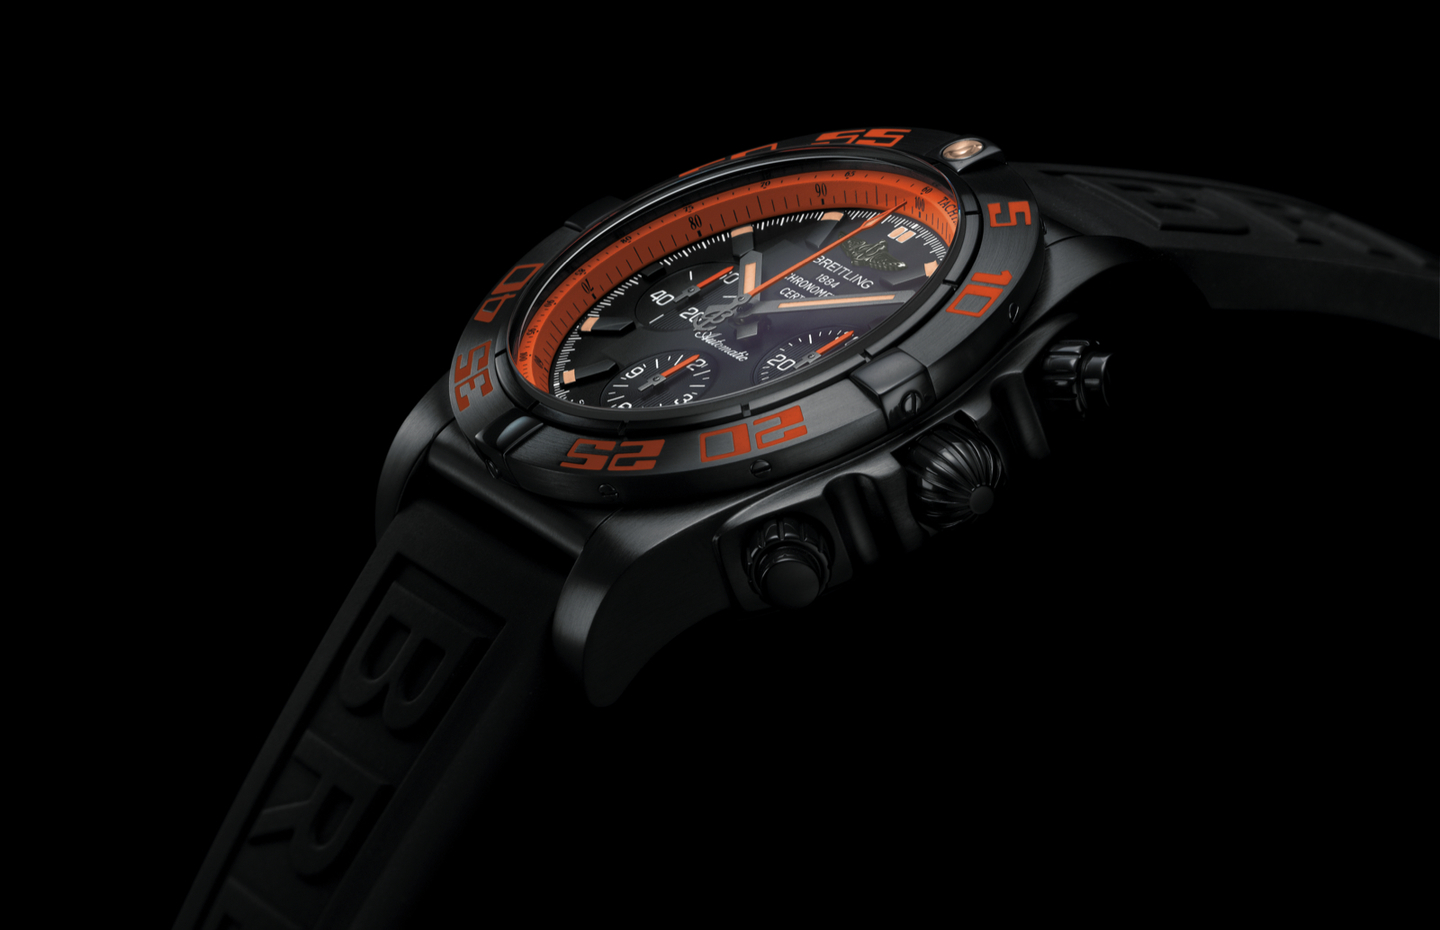 Introducing the Breitling Chronomat 44 Raven